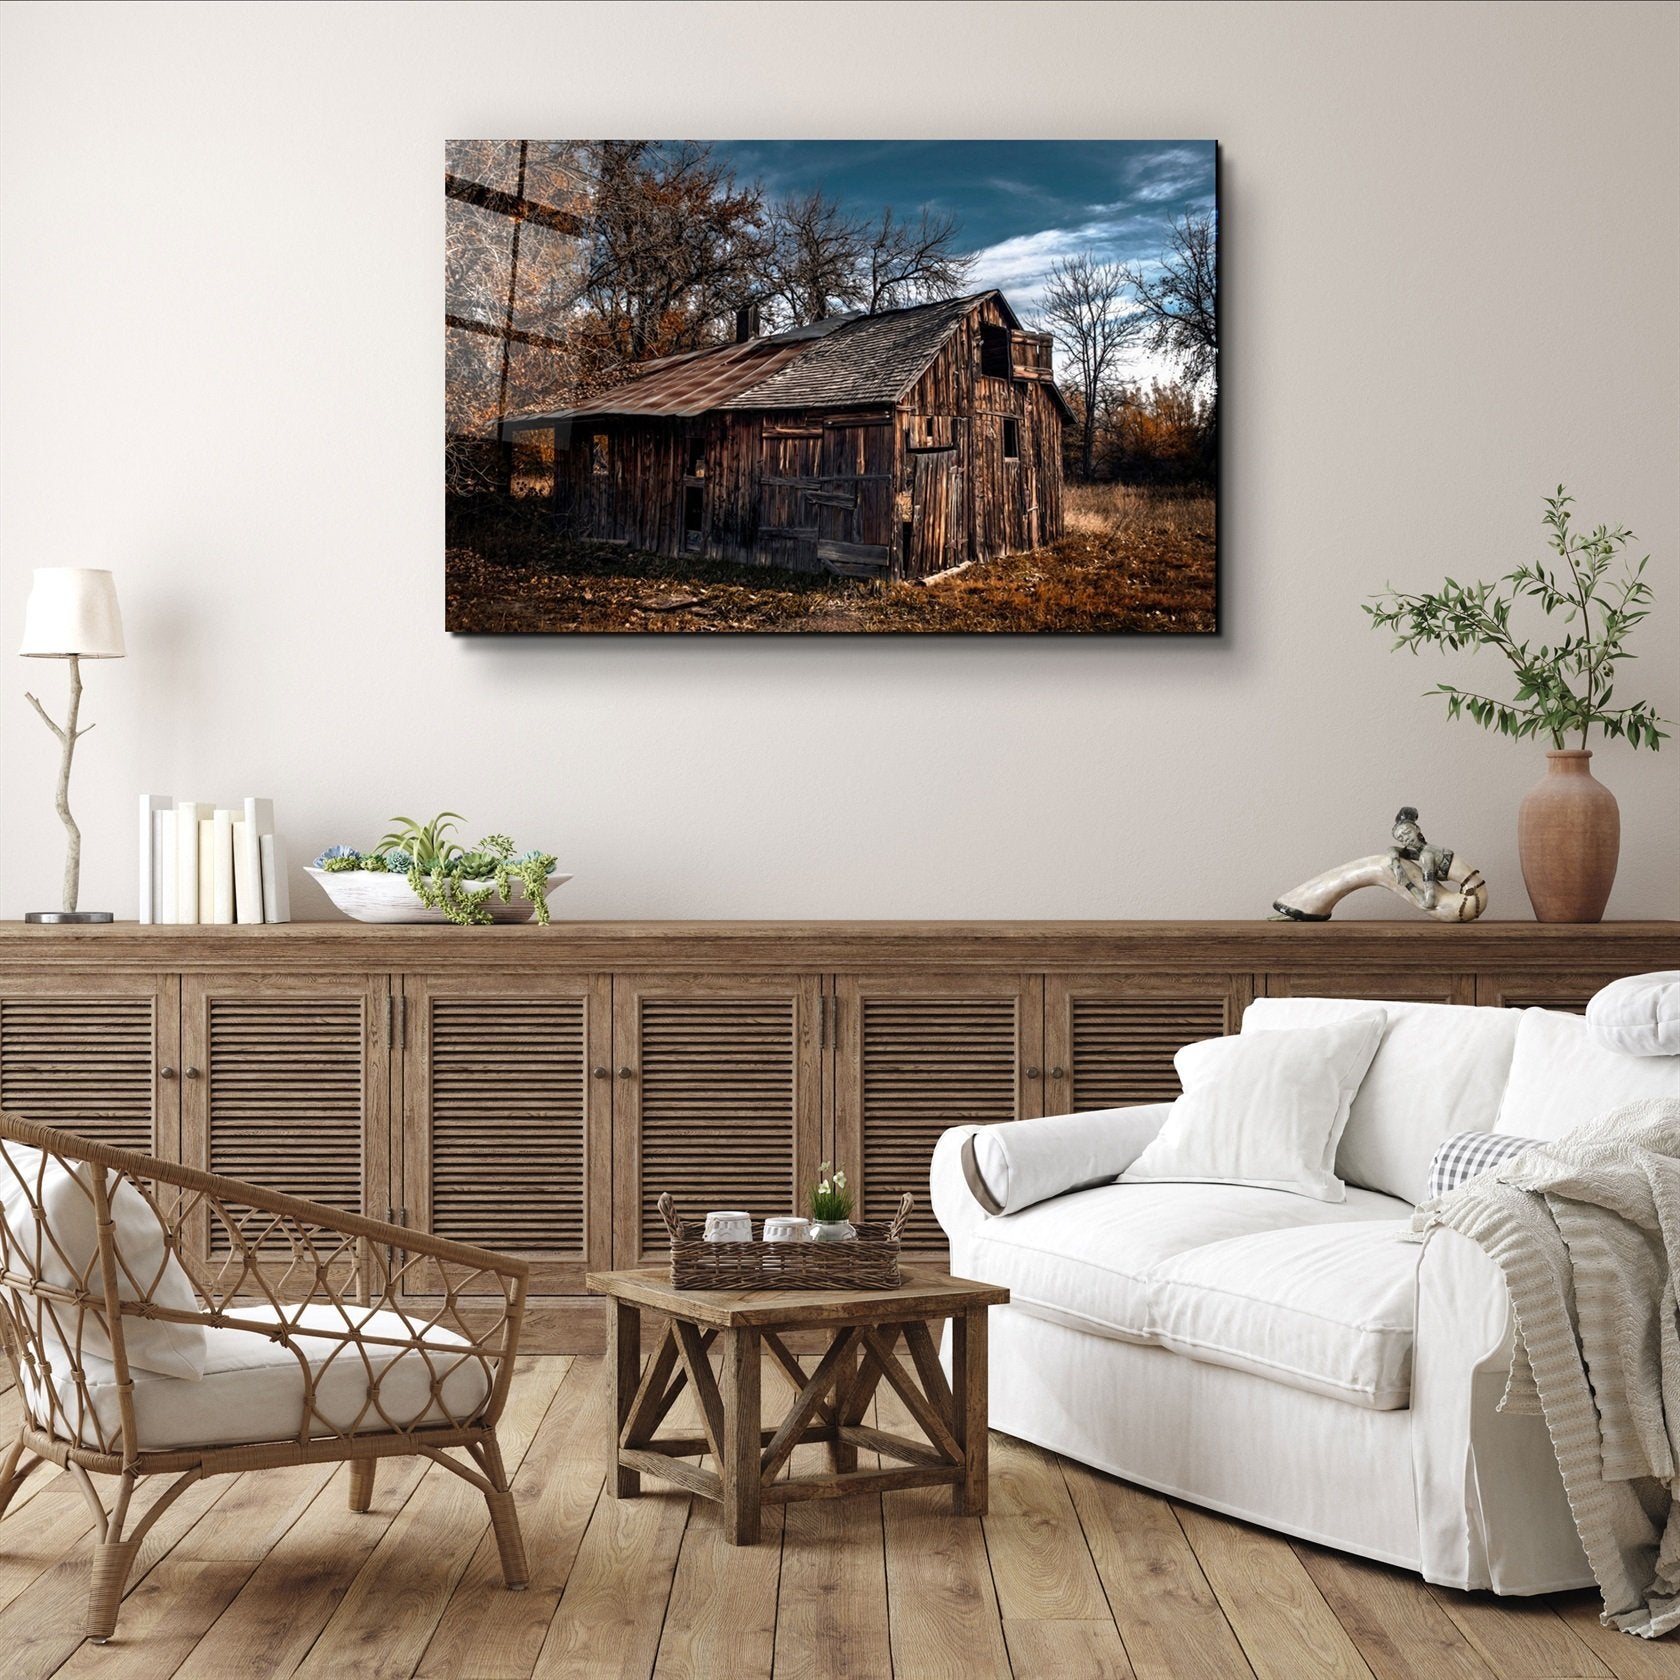 ・"Wooden Old House"・Glass Wall Art